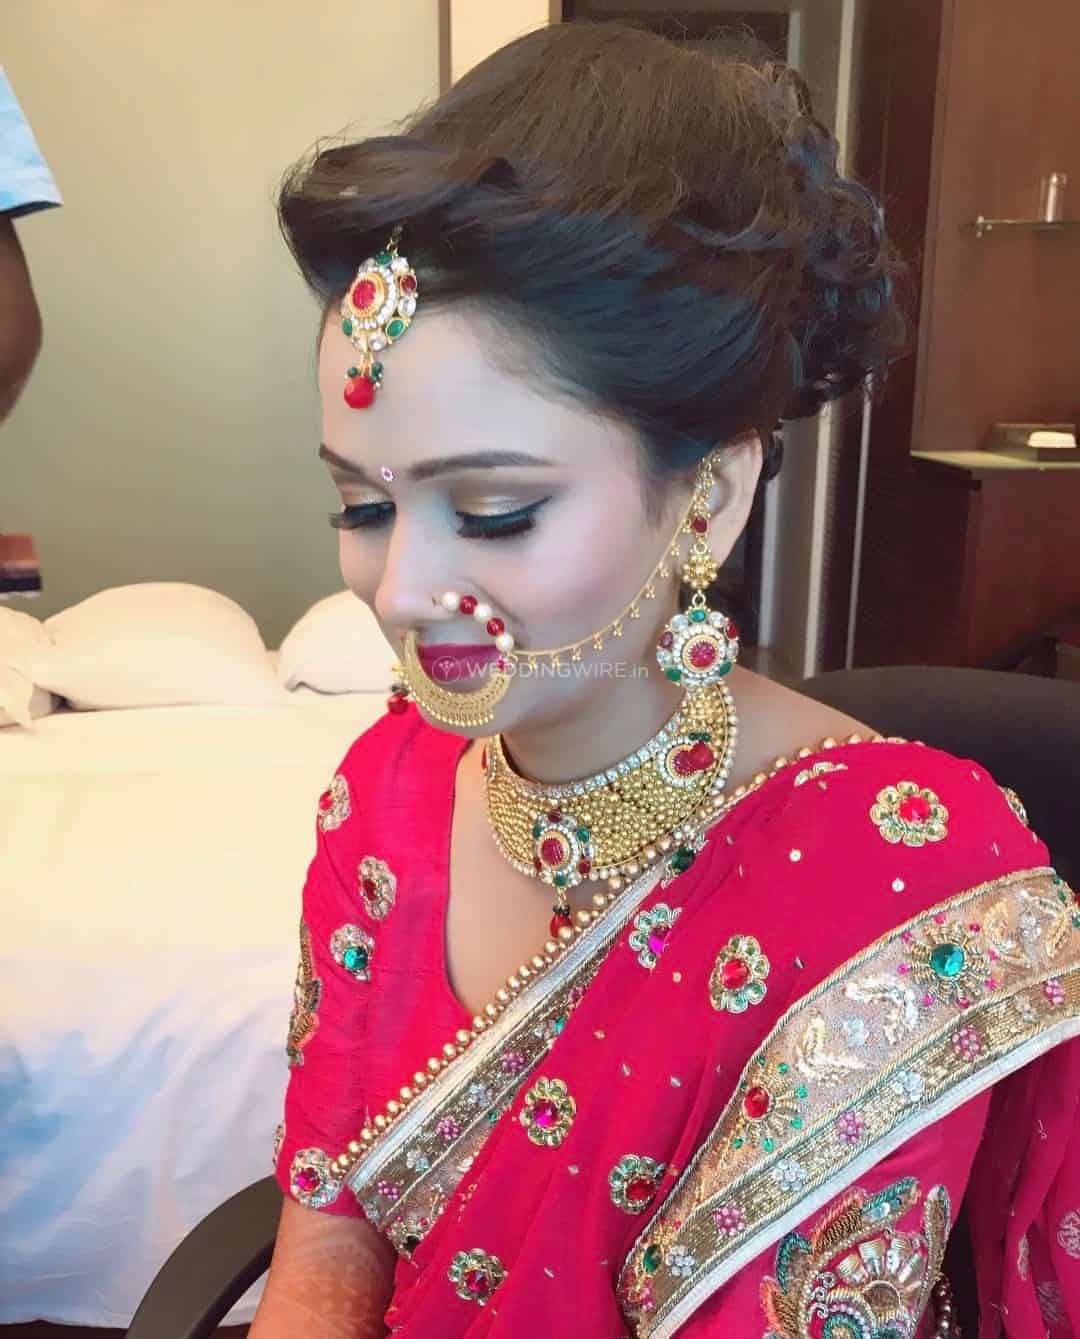 North Indian Bridal Makeup From Tejaswini Makeup Artist | Photo 12 pertaining to North Indian Bridal Makeup Pictures